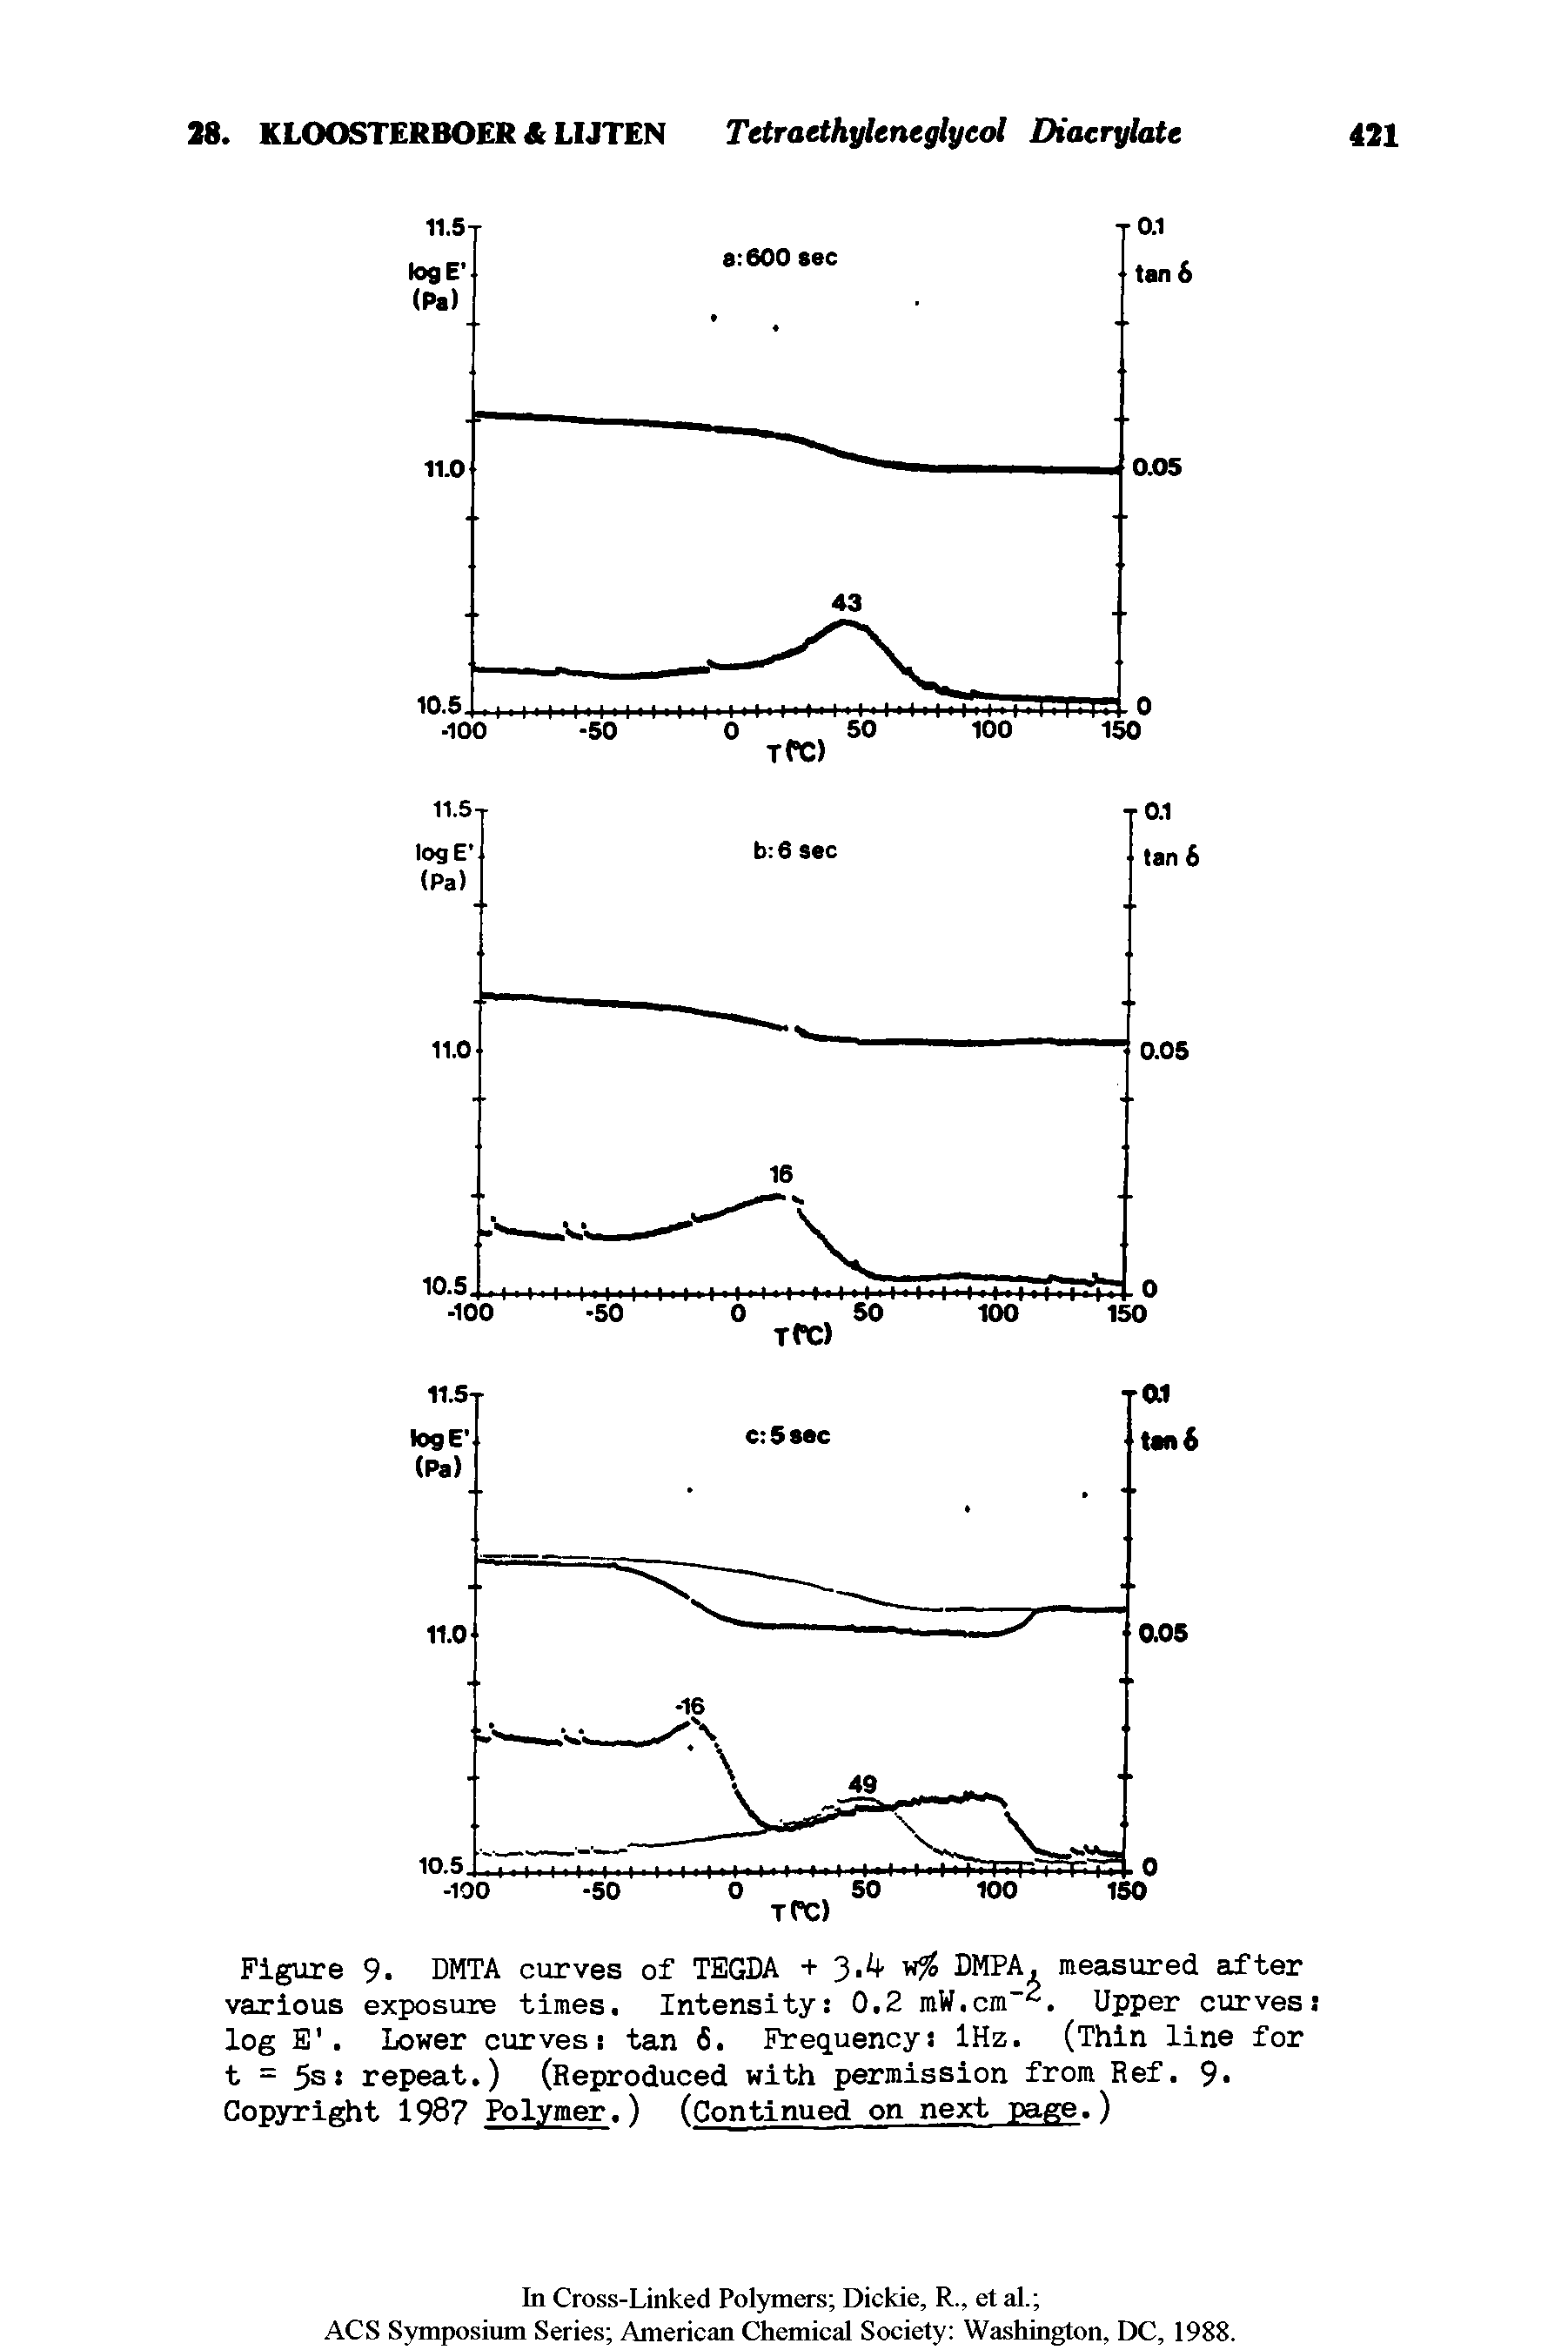 Figure 9. DMTA curves of TEGDA + 3.4 DMPA, measured after various exposure times. Intensity 0.2 mW.cm 2. Upper curves log E. Lower curves tan 6. Frequency IHz. (Thin line for t = 5s repeat.) (Reproduced with permission from Ref. 9 Copyright 198 Polymer.) (Continued on next page.)...